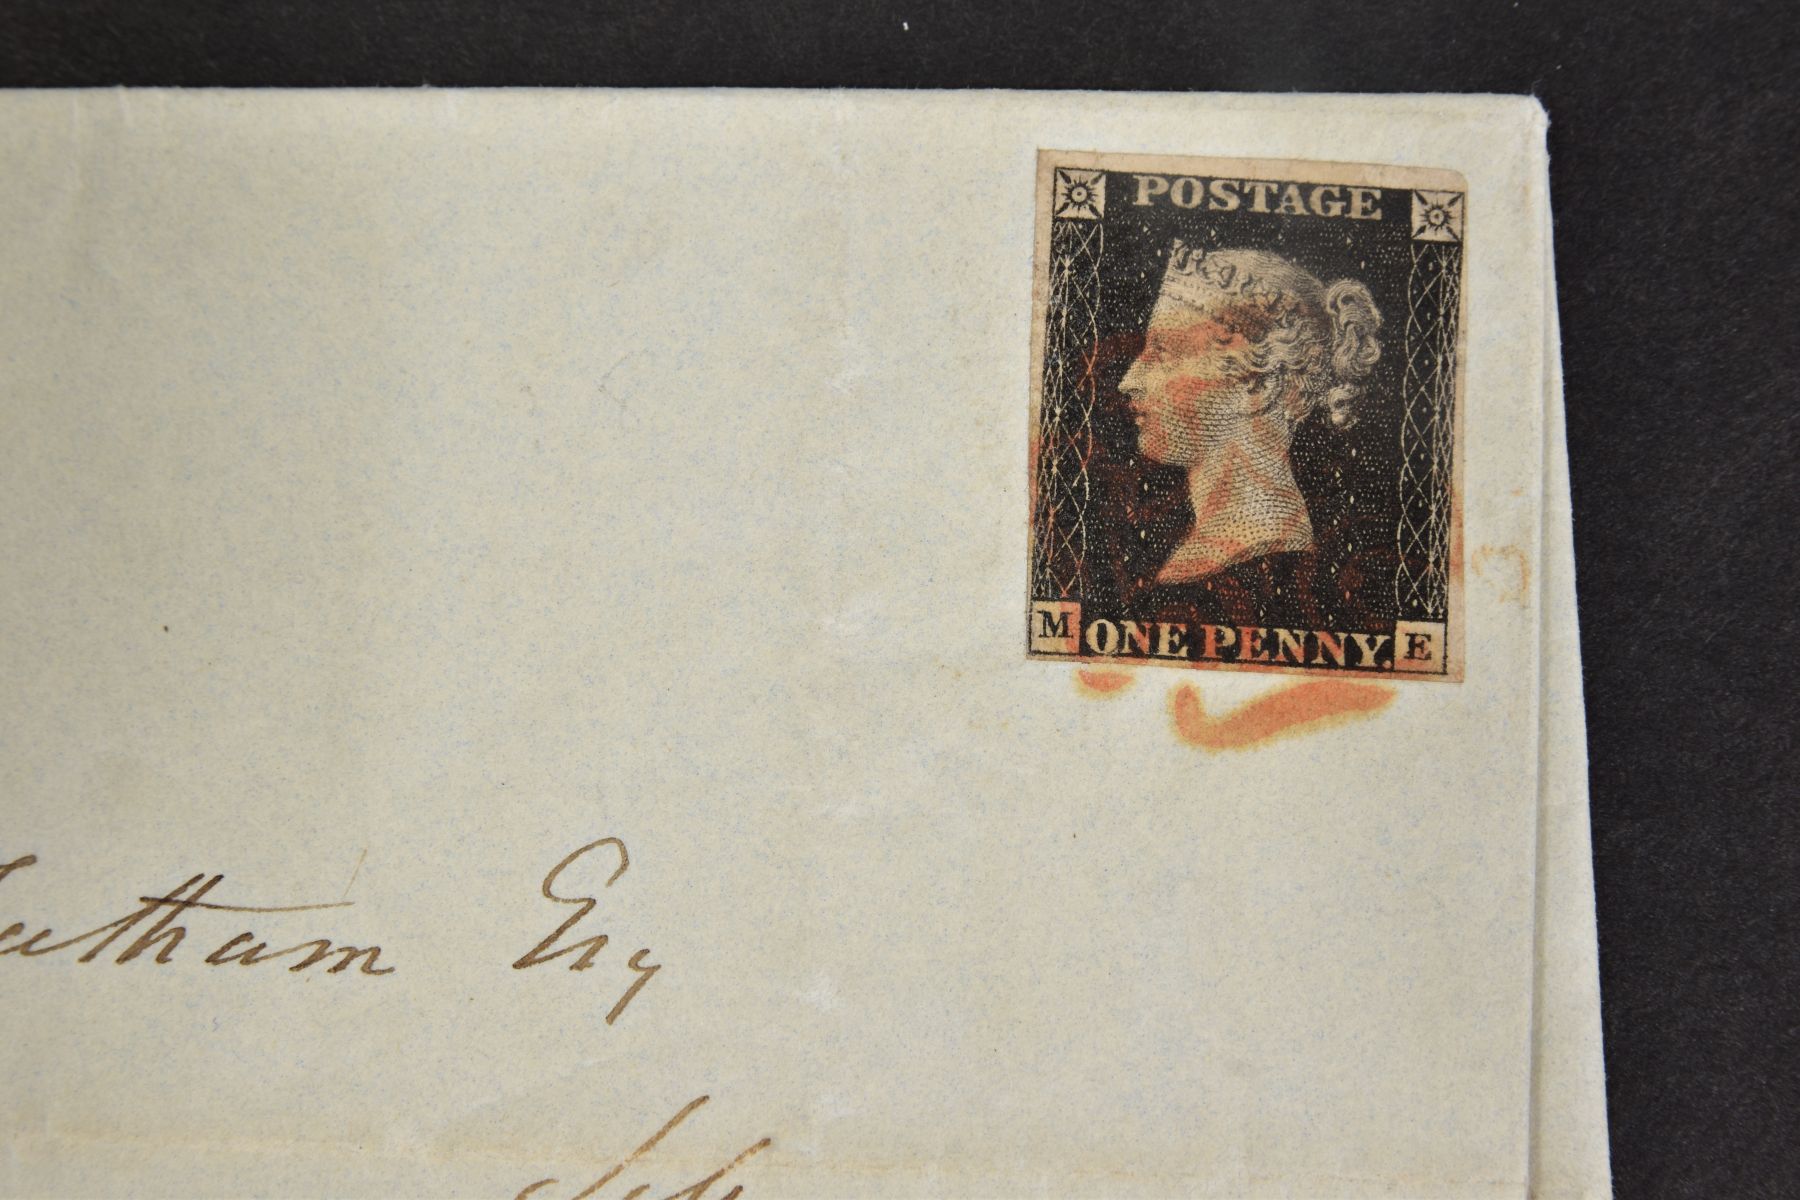 GB 1840 PENNY BLACK ME 4 margins (just) on cover - Image 2 of 3